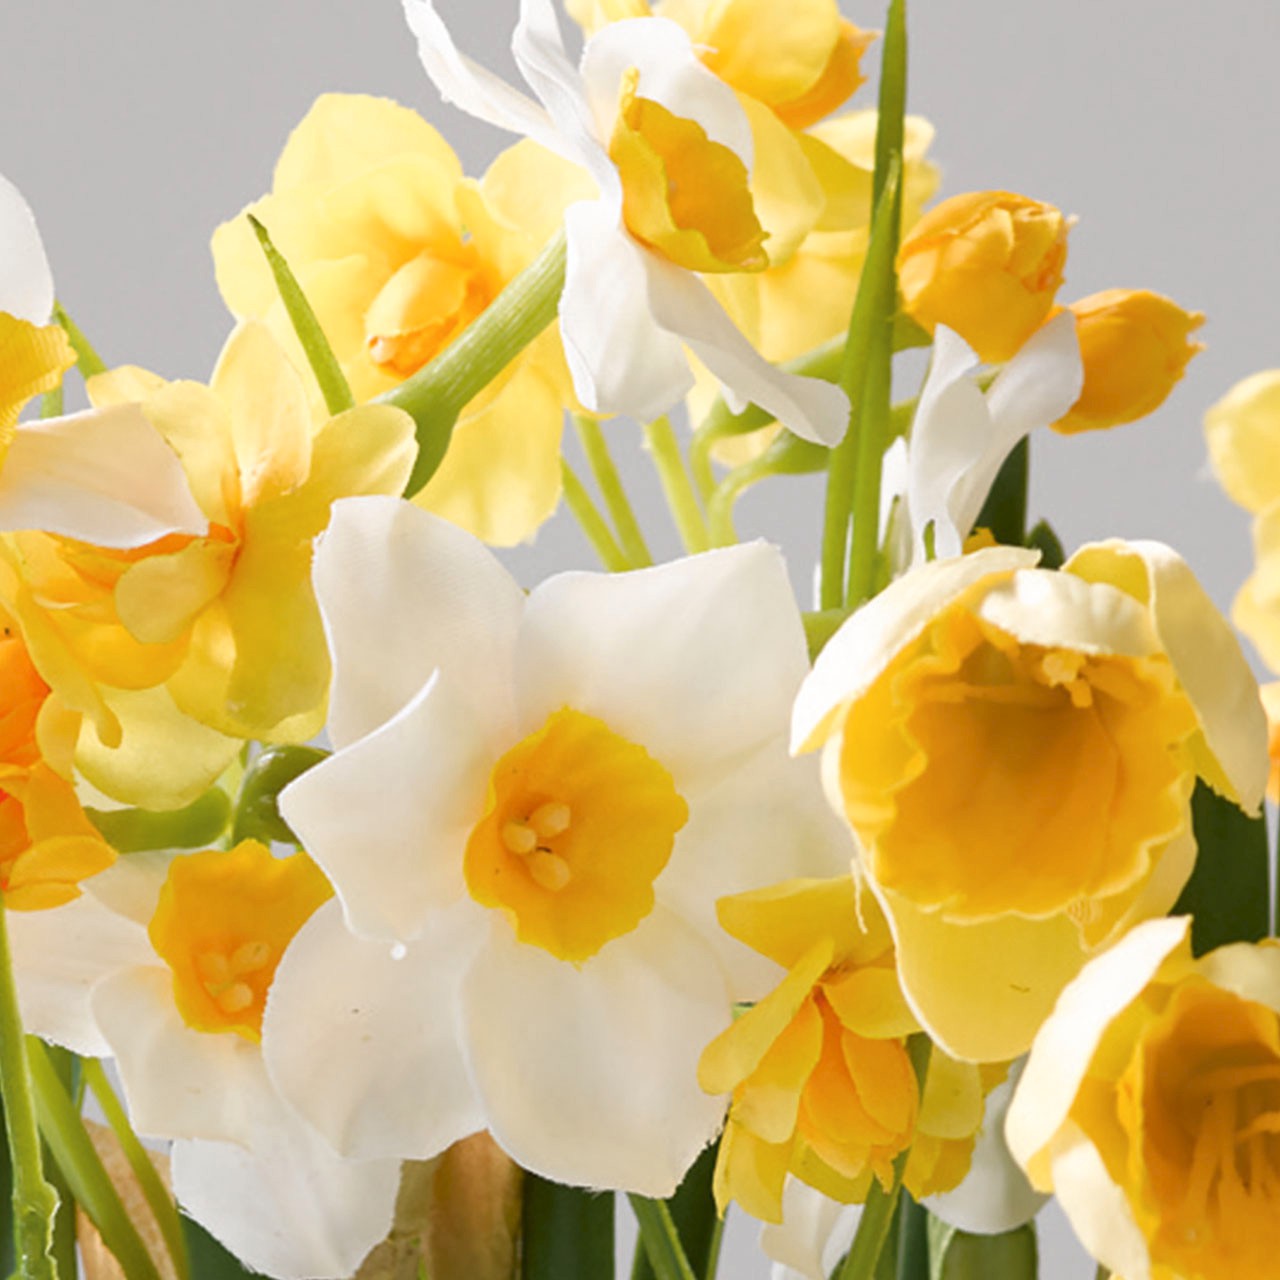 Growing Narcissus Collection | Bloom UK